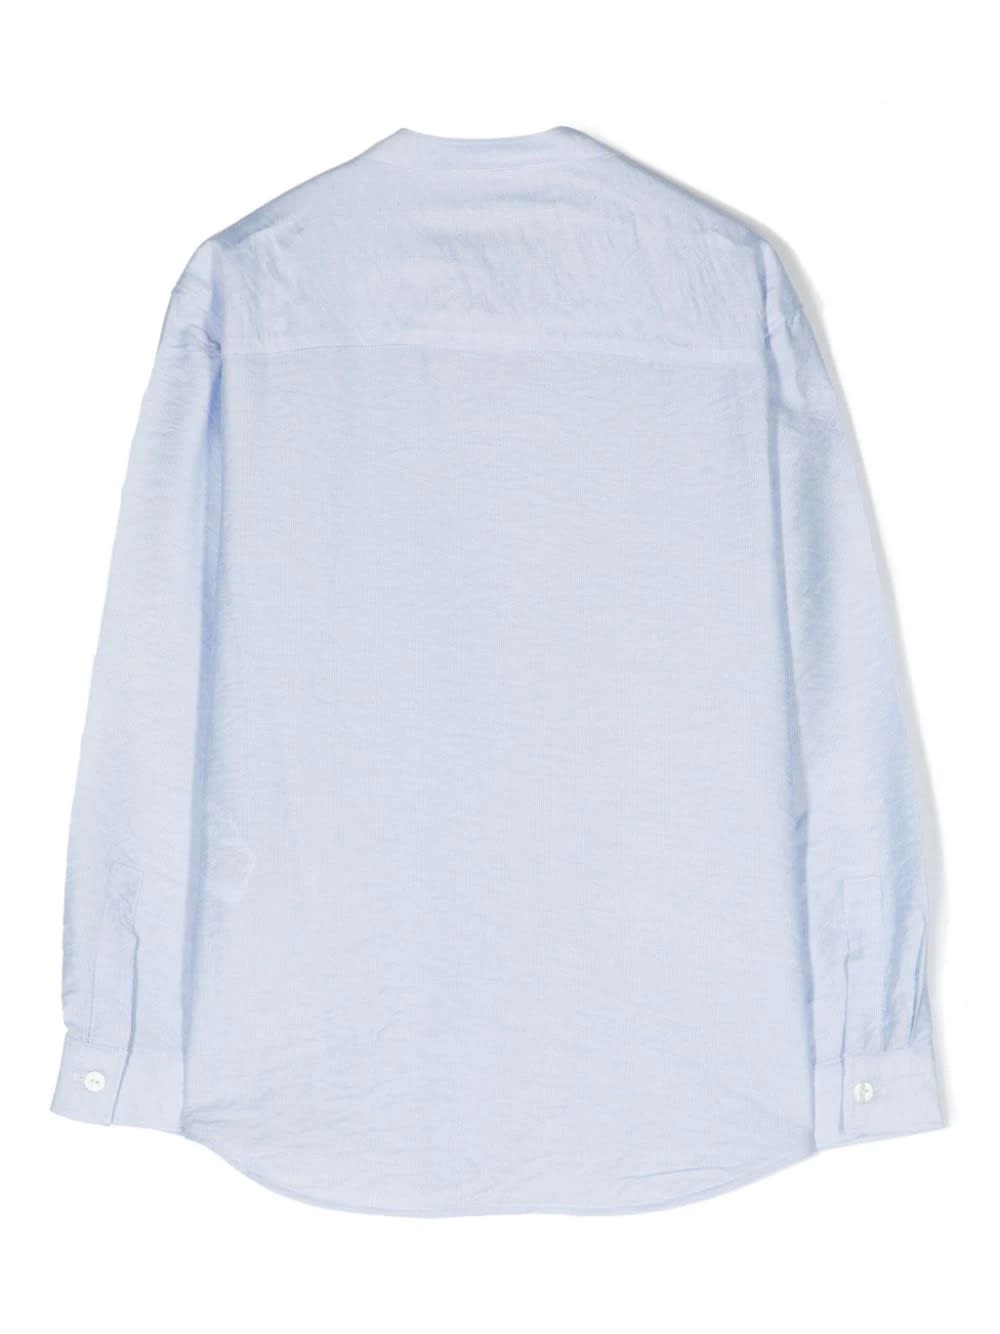 Shop Dondup Shirt With Light Blue Striped Micro Pattern